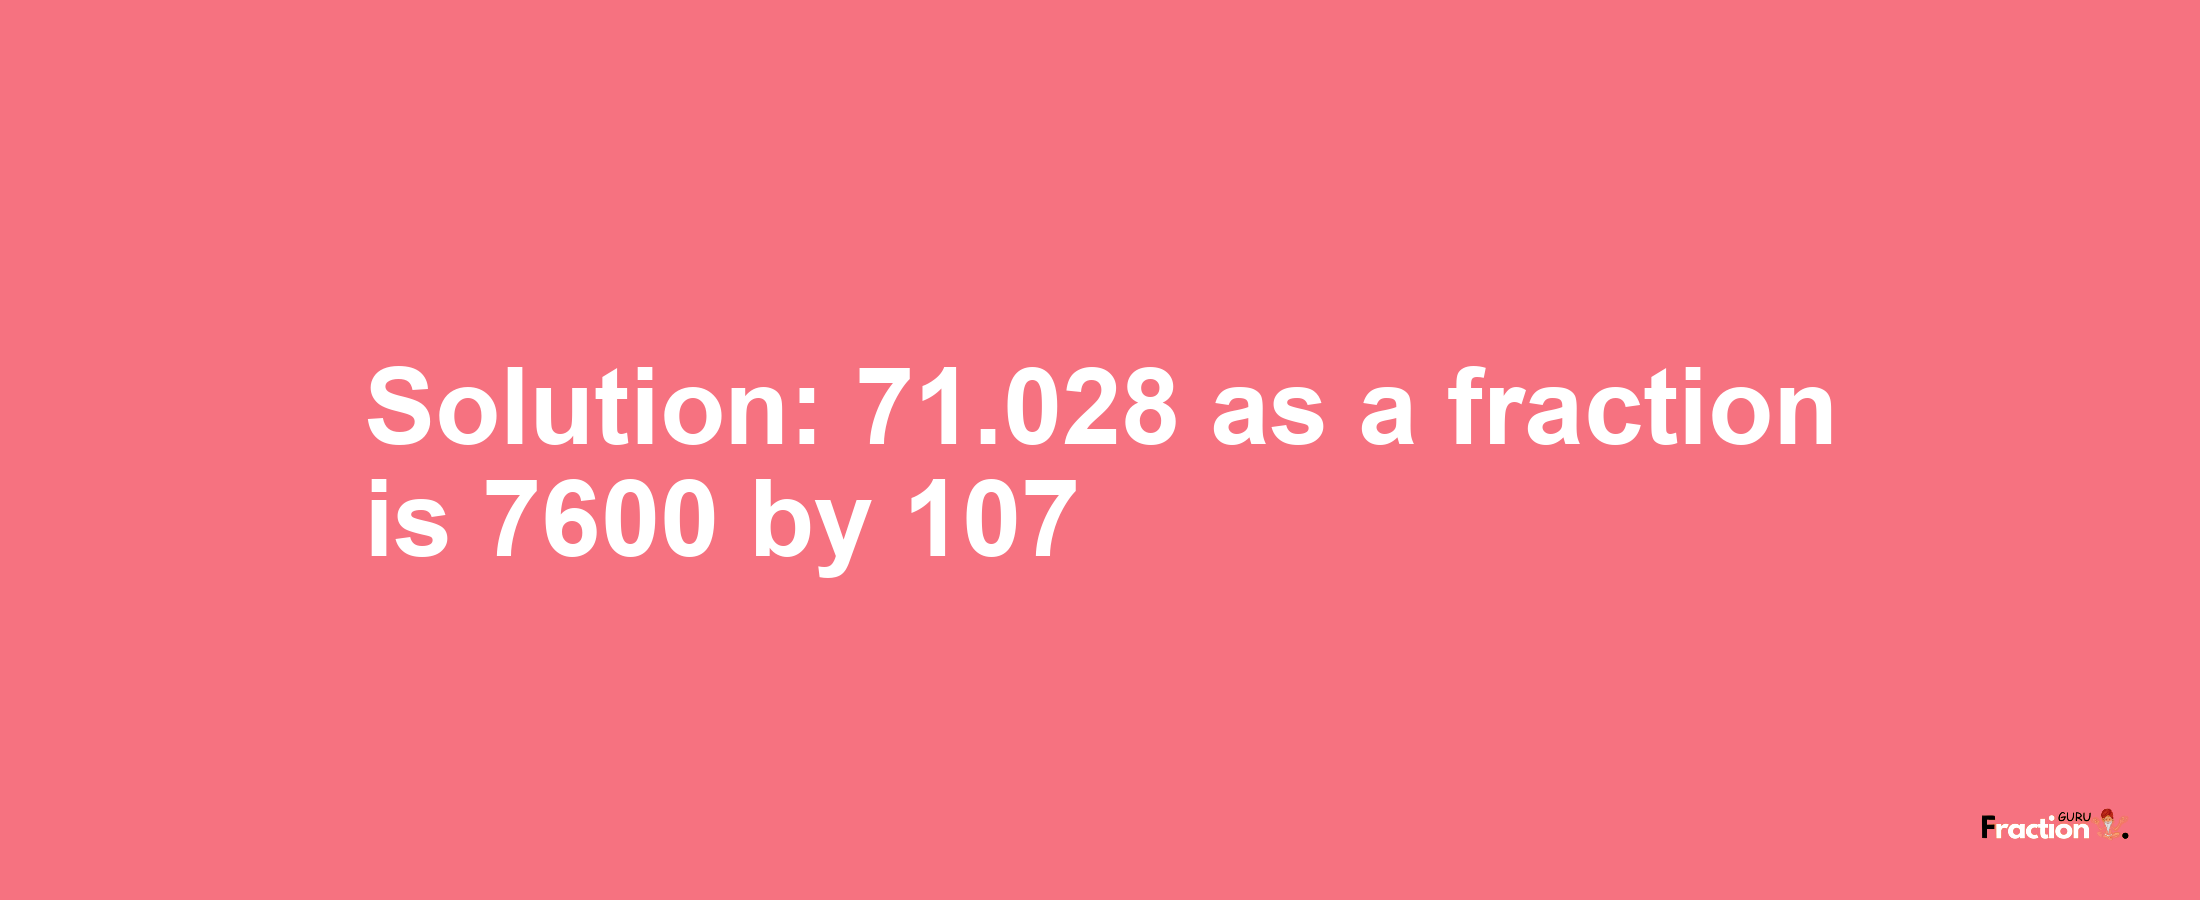 Solution:71.028 as a fraction is 7600/107